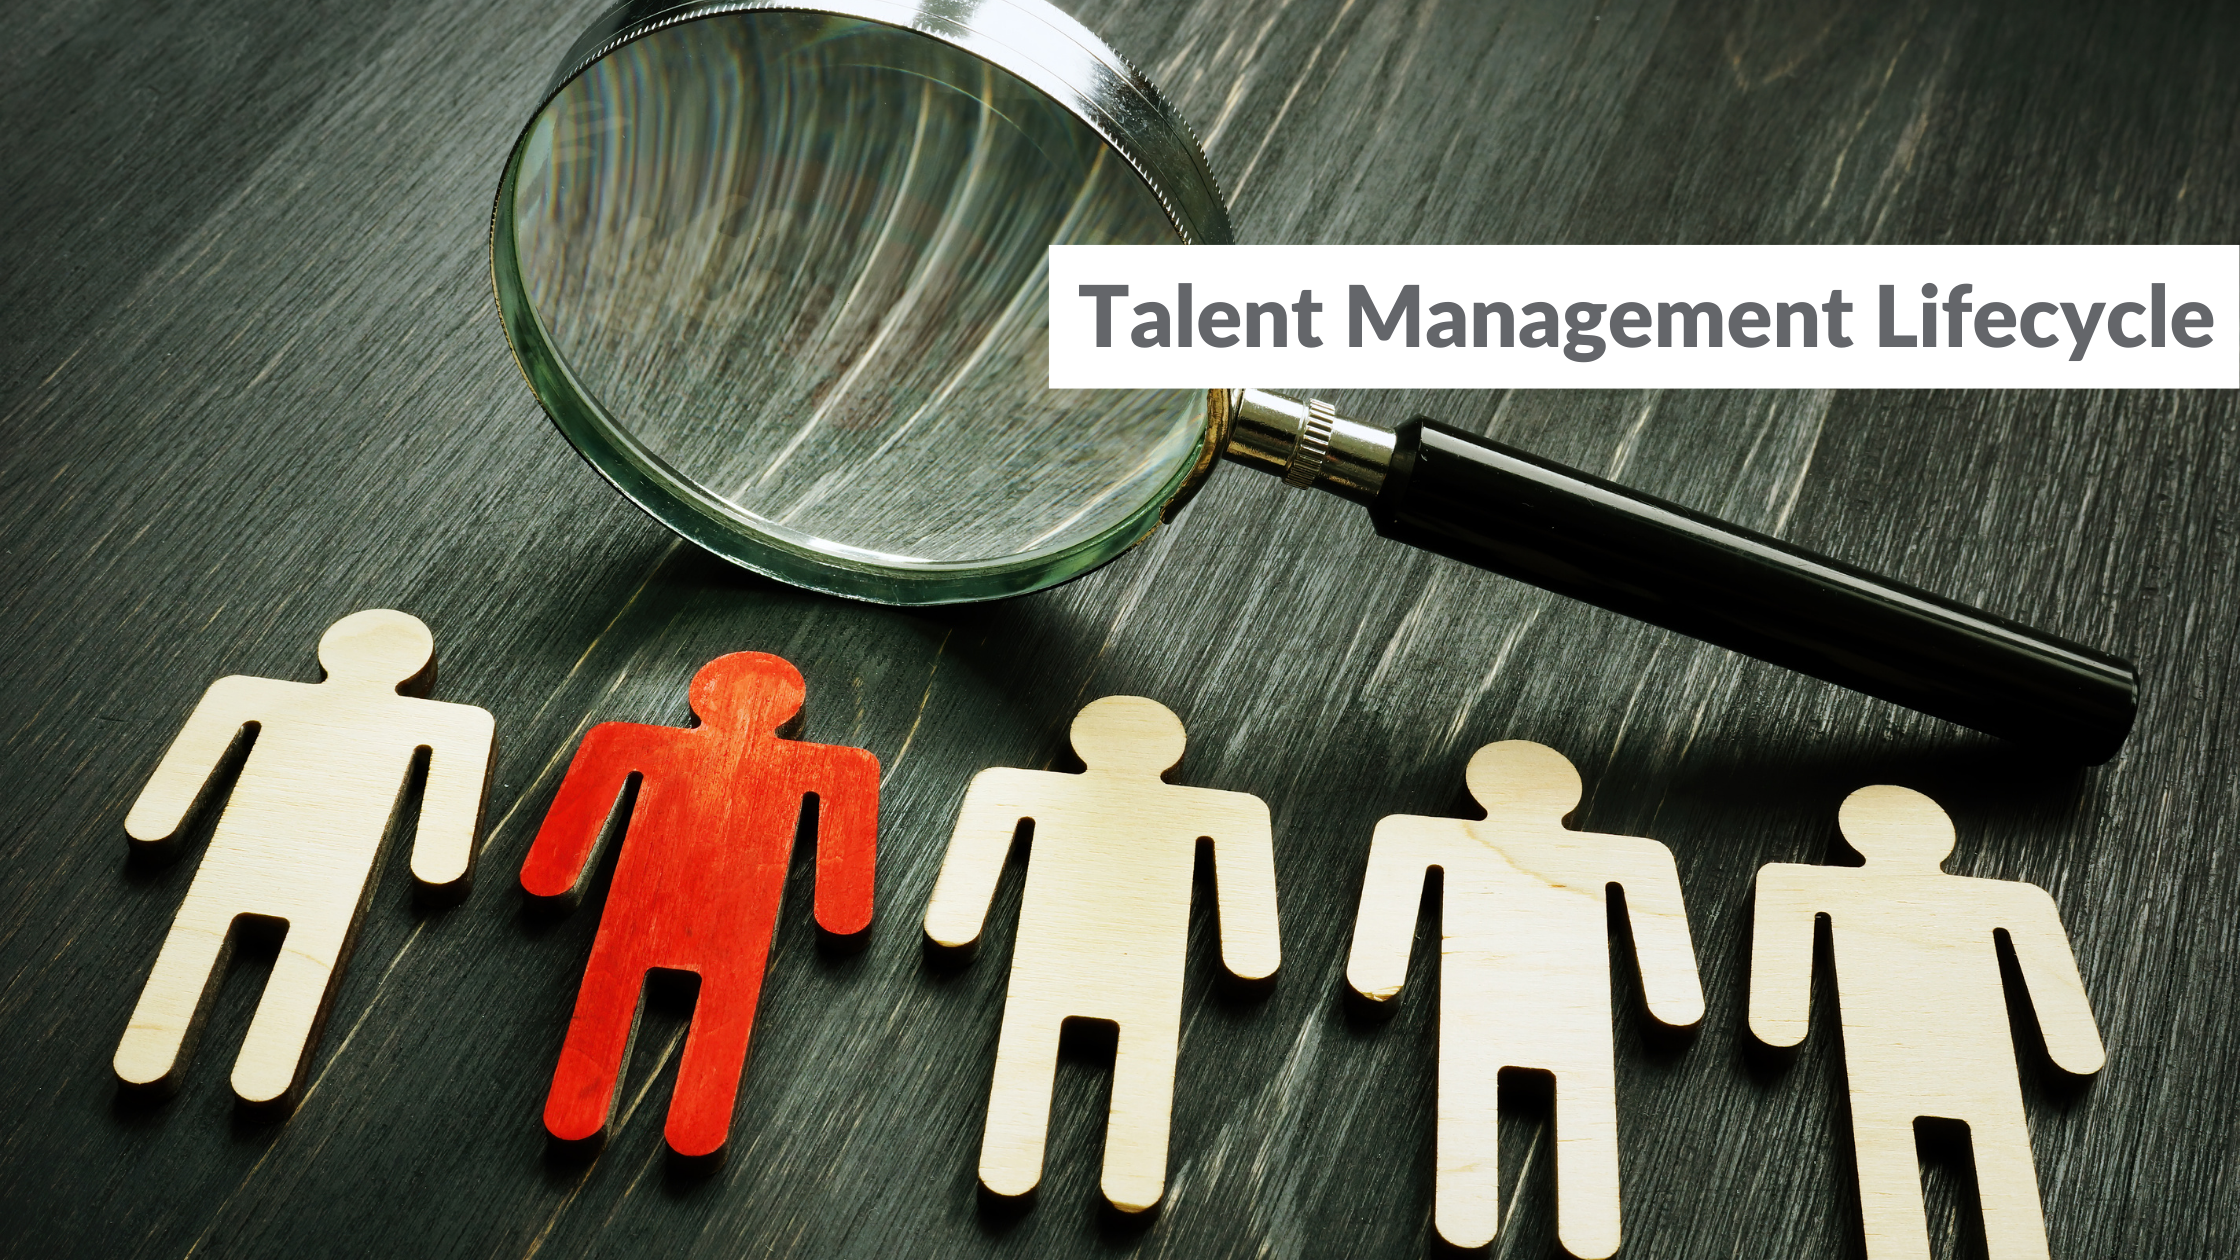 Talent Management Lifecycle